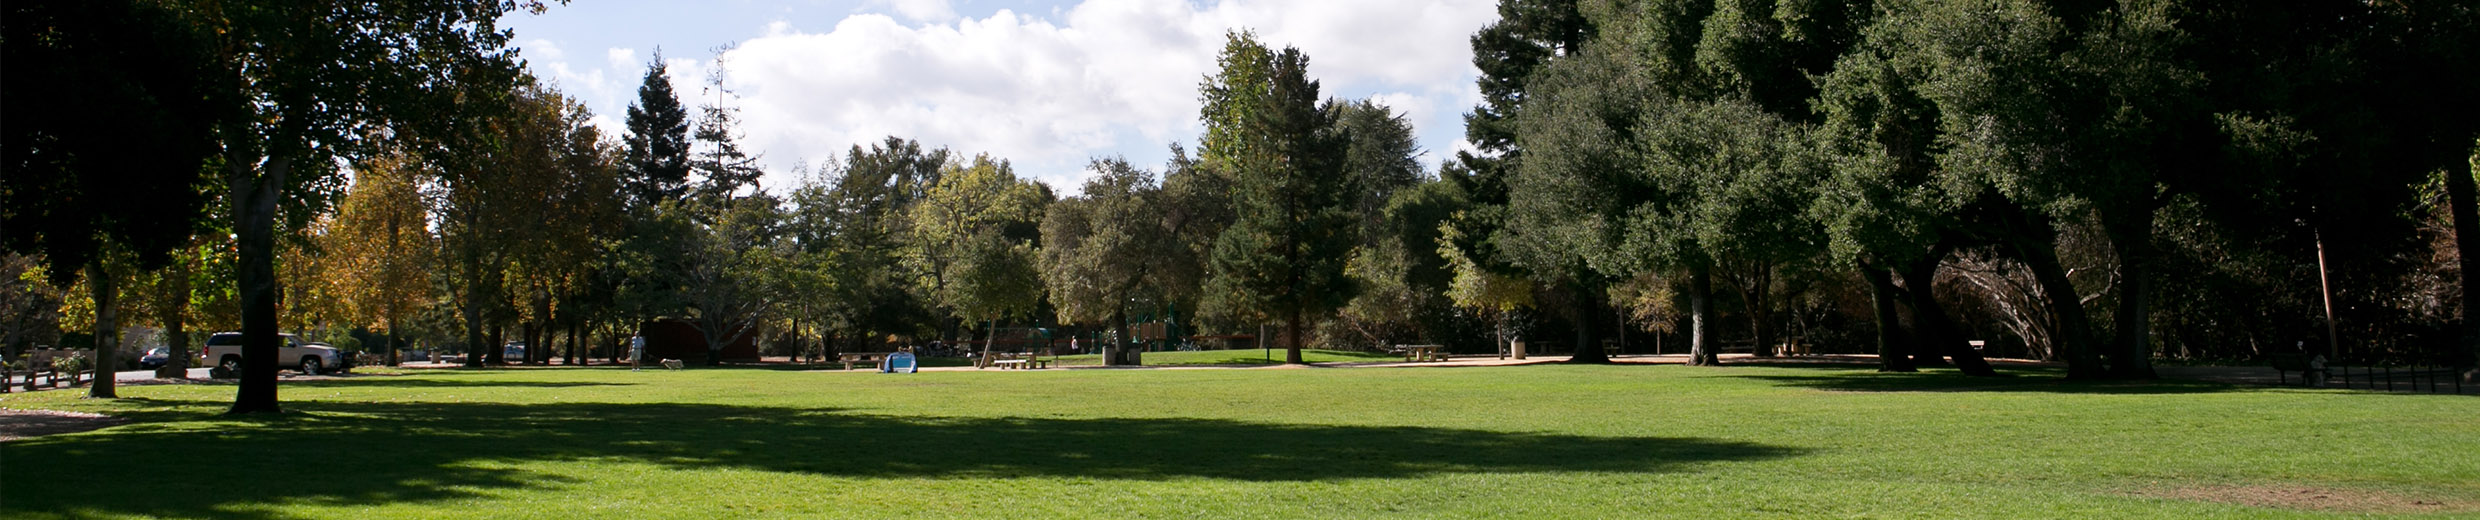 image of grassy lawn with trees